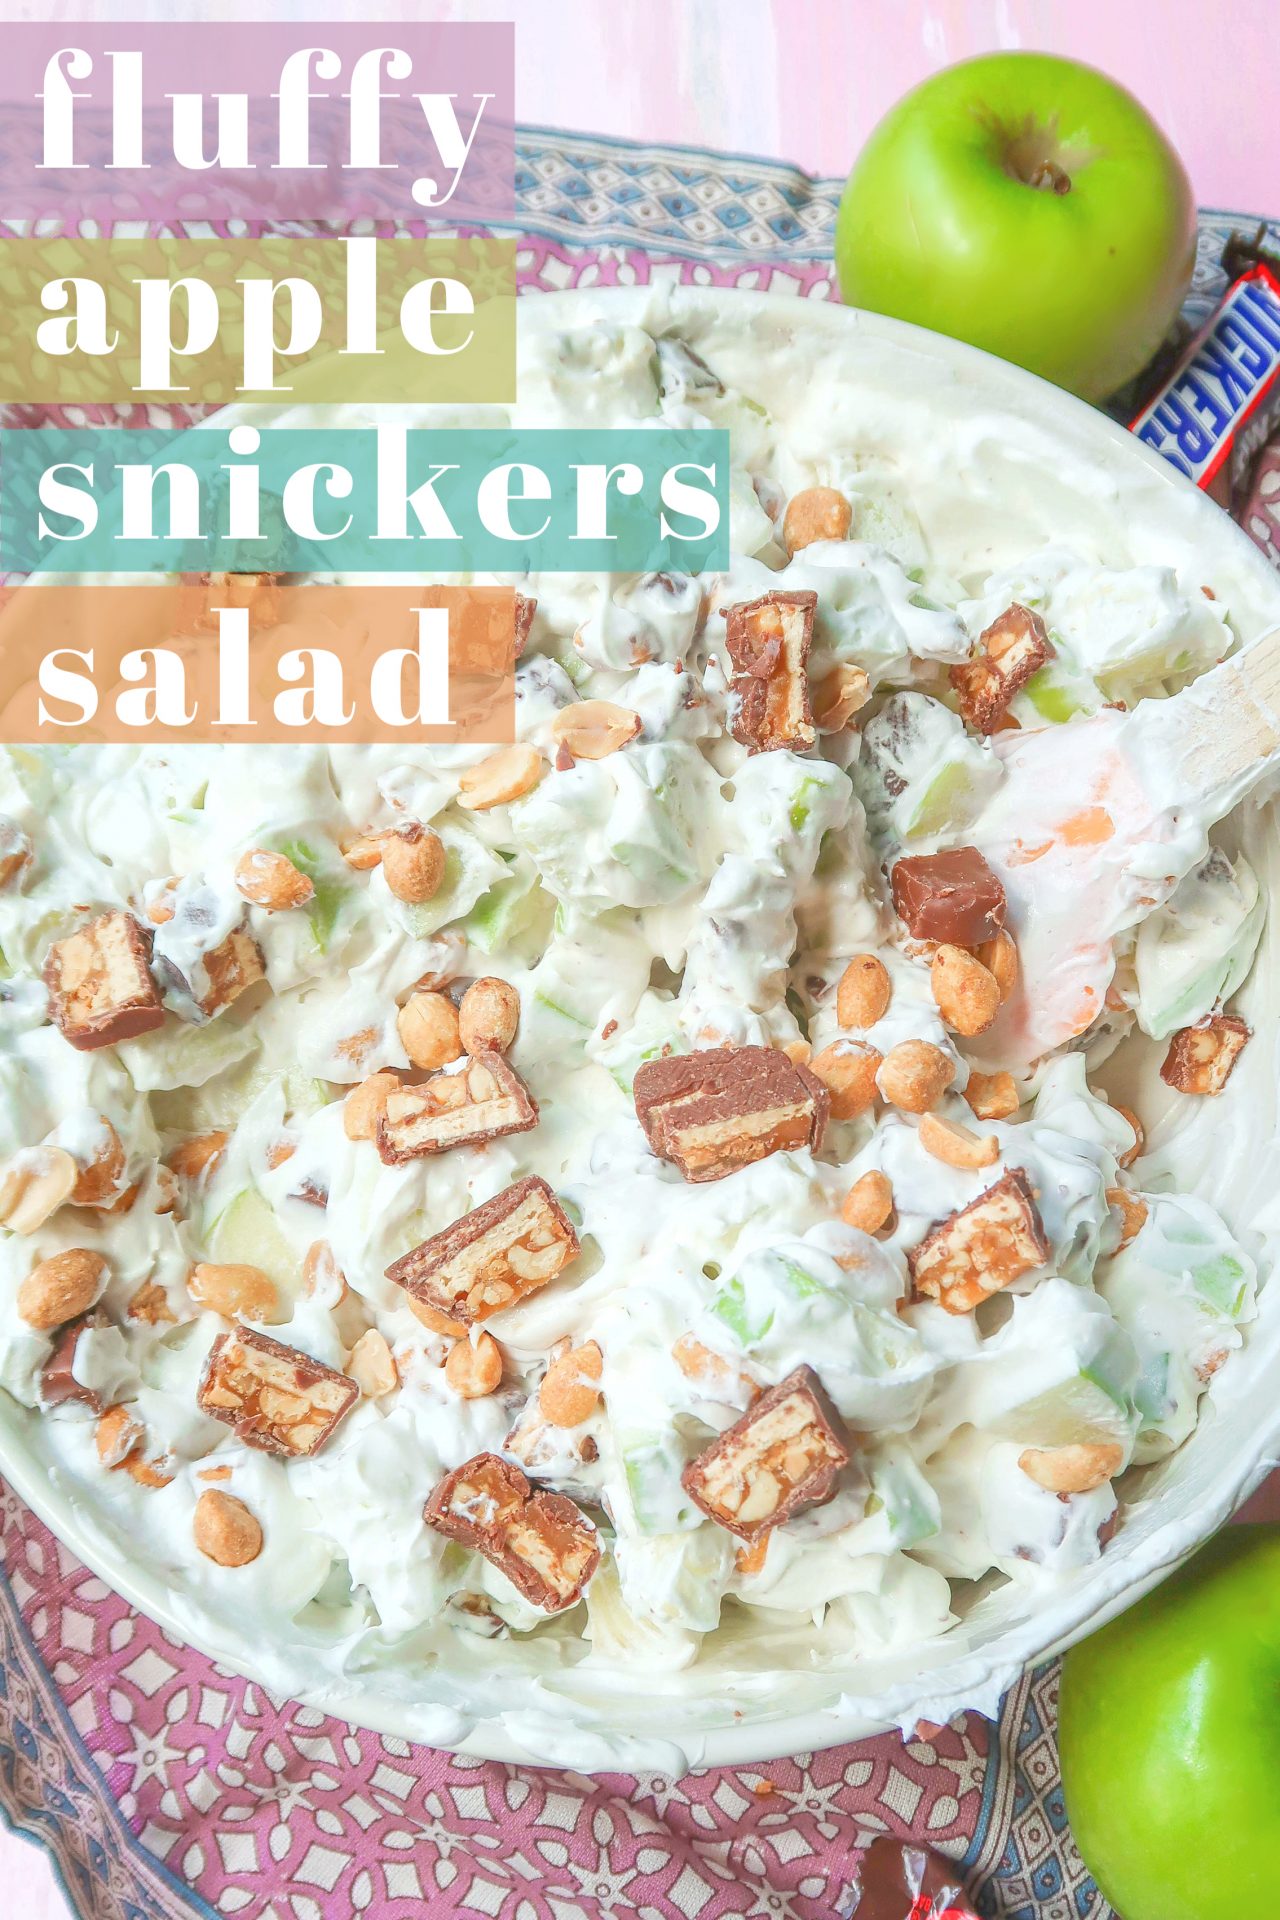 apple snickers salad, whipped cream, vanilla pudding, creamy, dessert salad, summer bbq, party food, chilled salad, summer